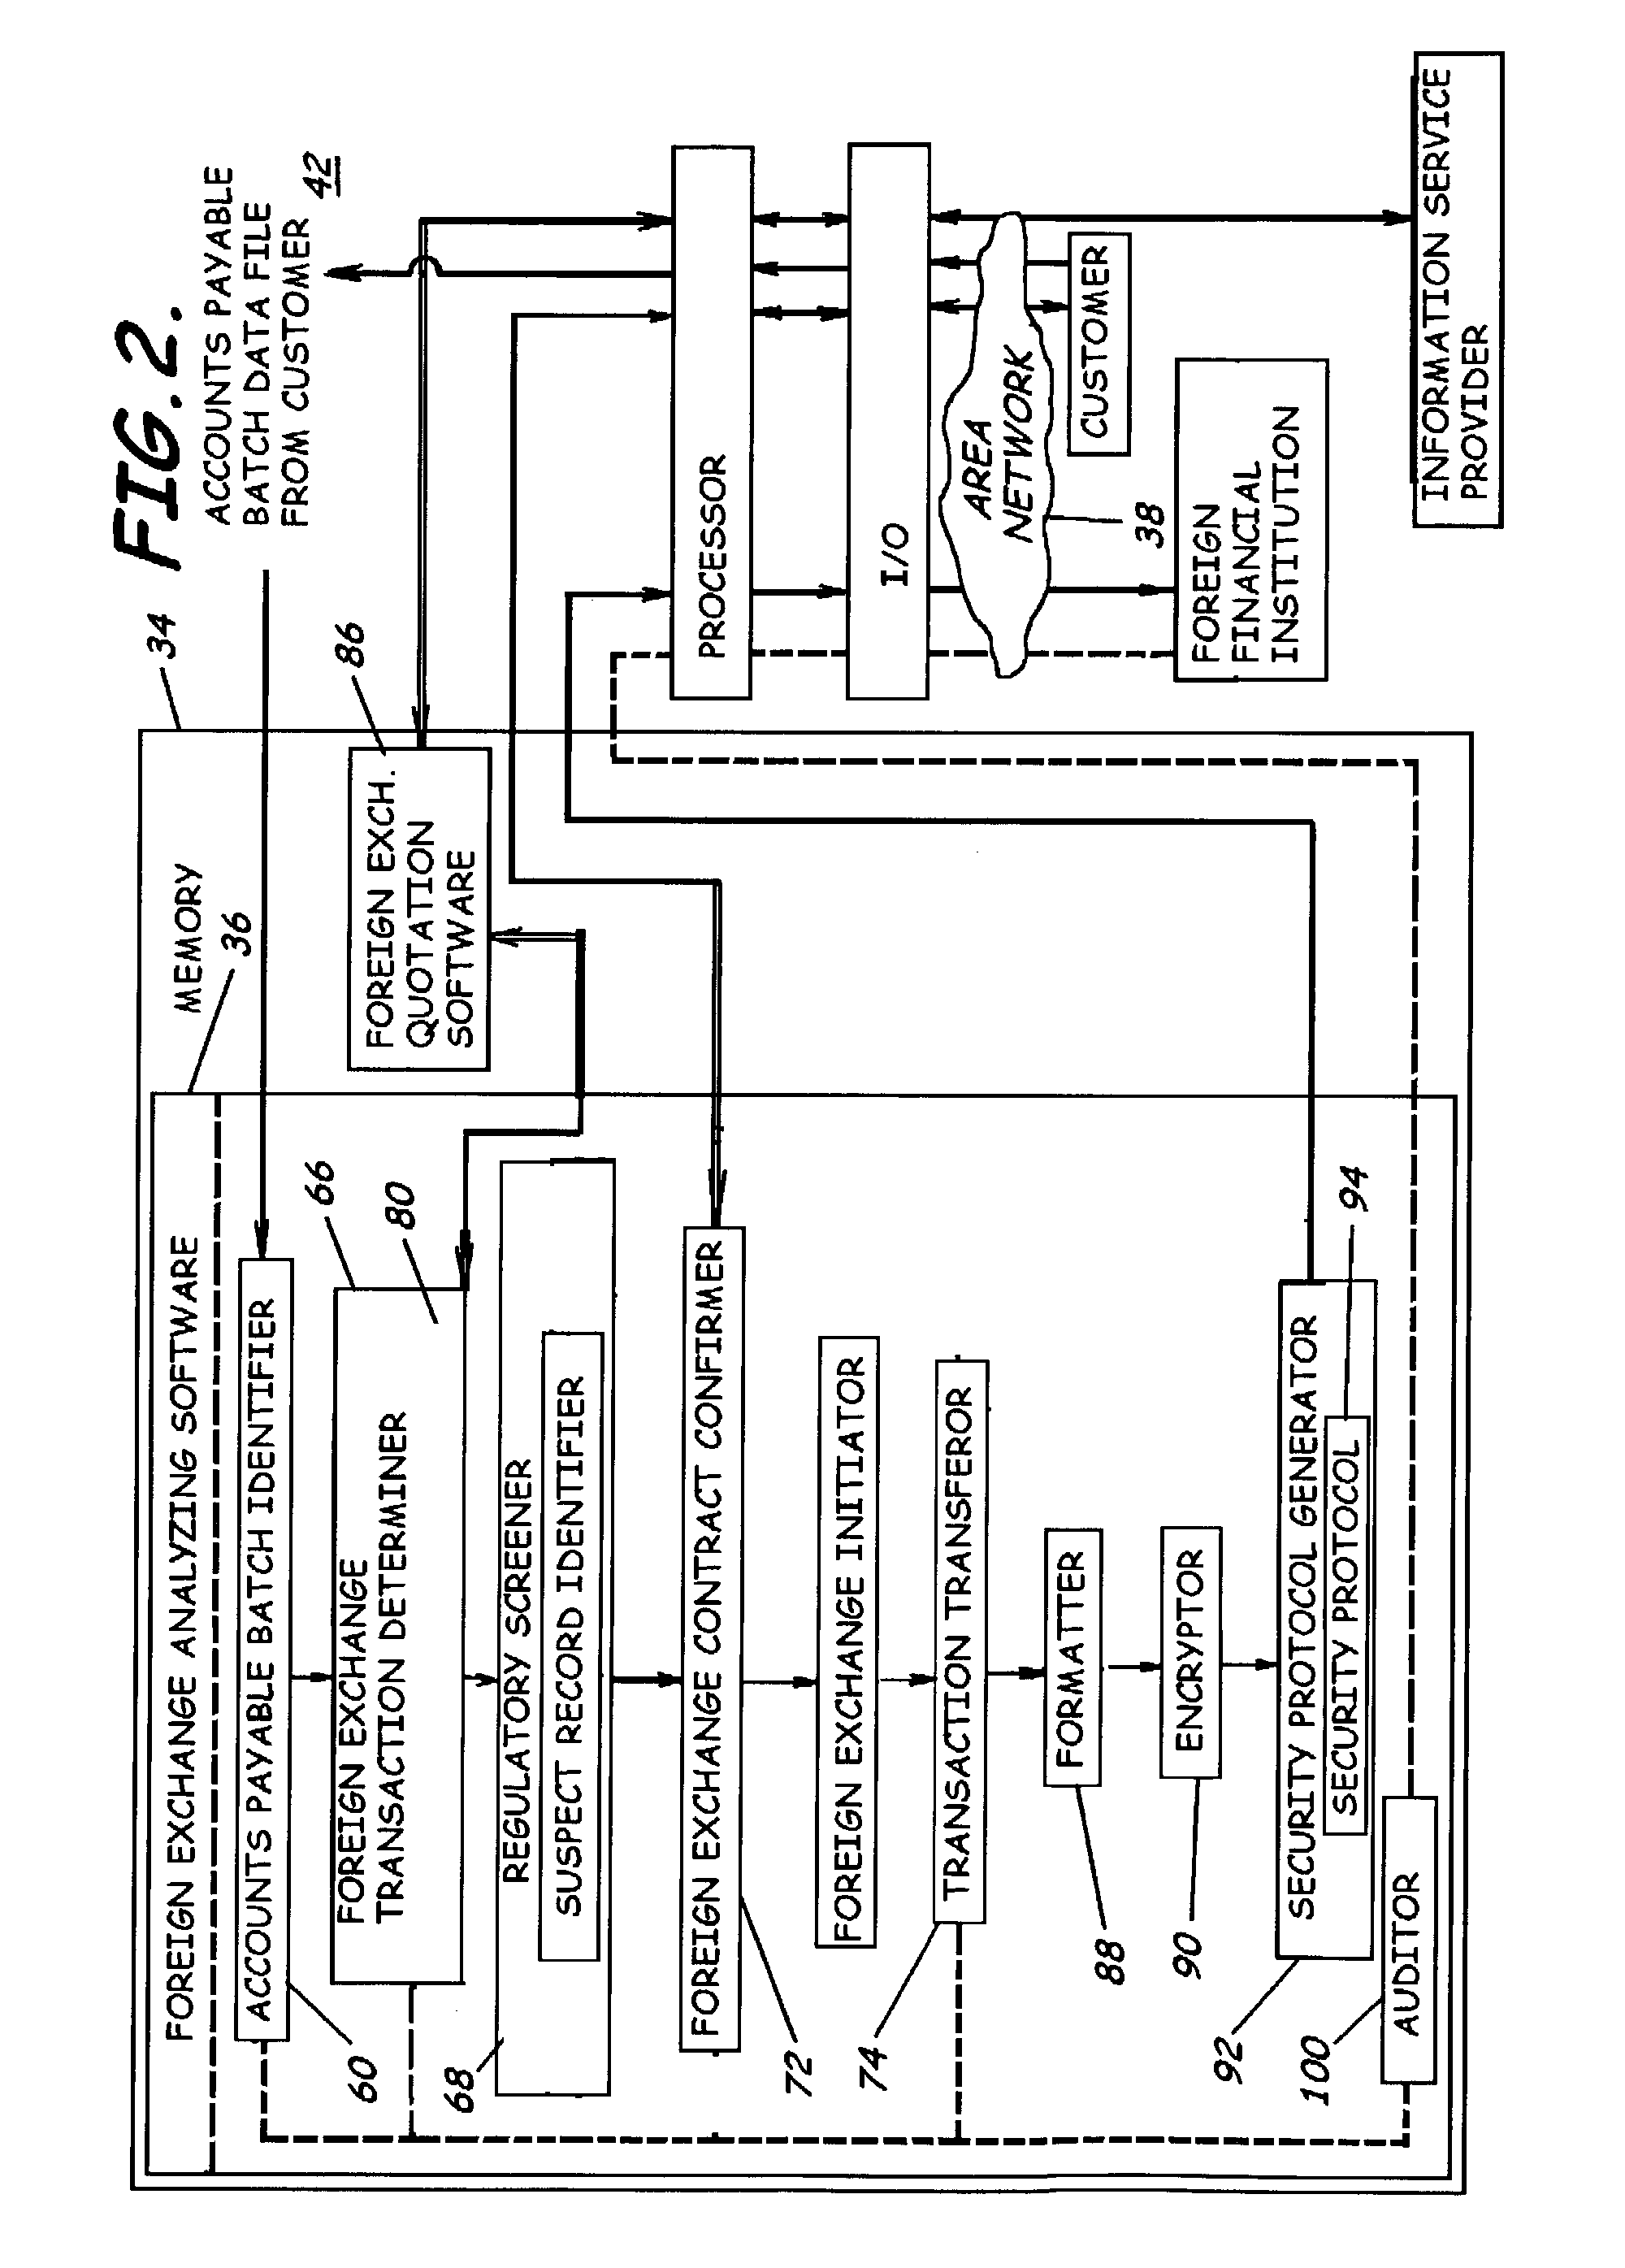 System to facilitate payments for a customer through a foreign bank, software, business methods, and other related methods